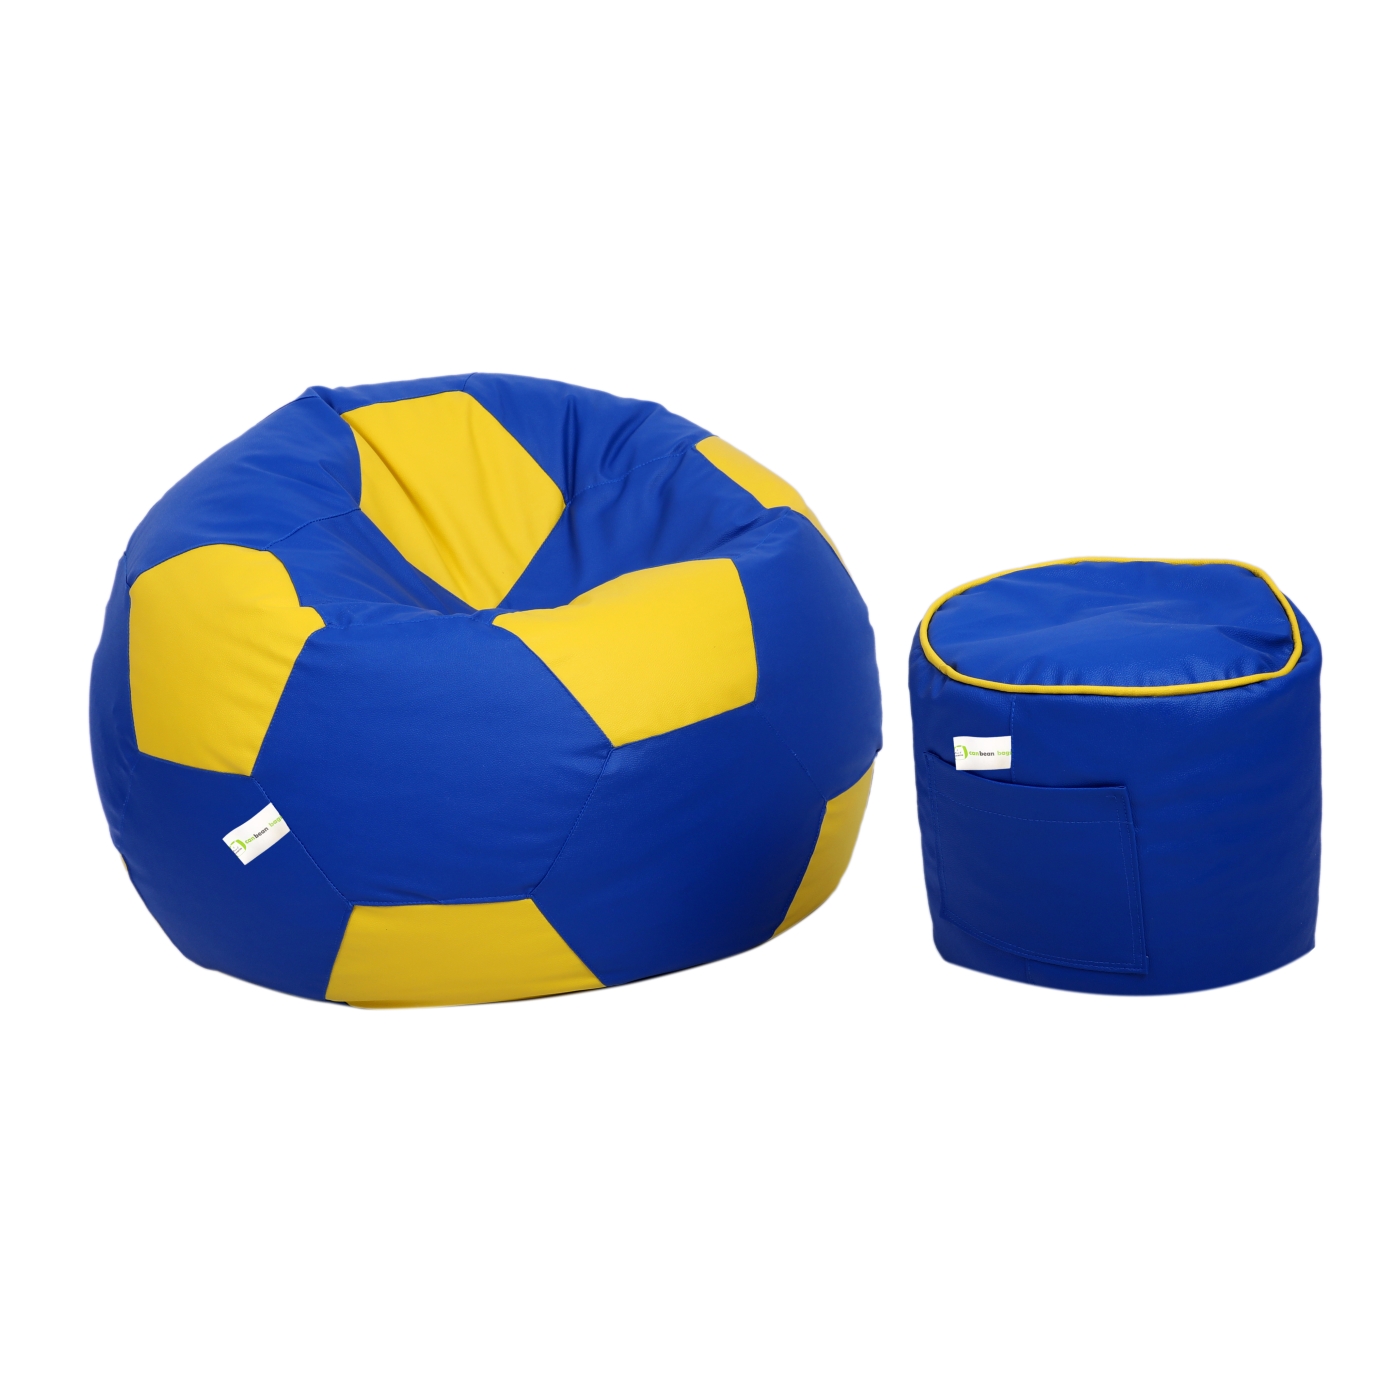 Can Bean Bags Classic Football With Footstool Bean Bags Blue, Yellow   